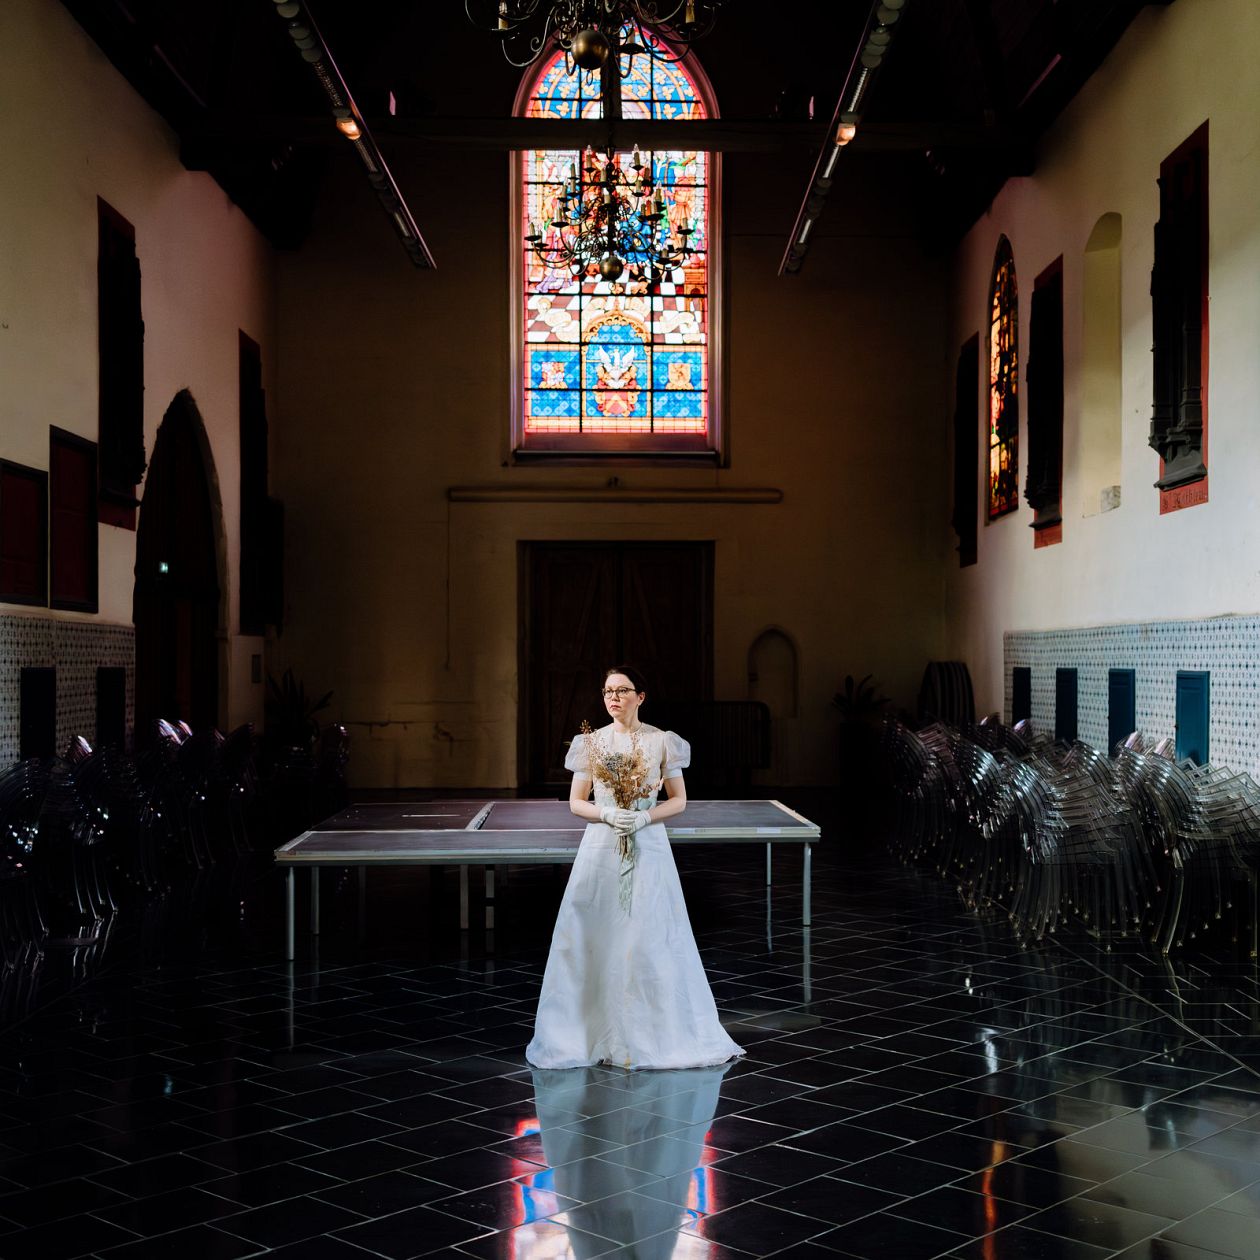 Beautiful bride in a white wedding dress posing in the interior of the church